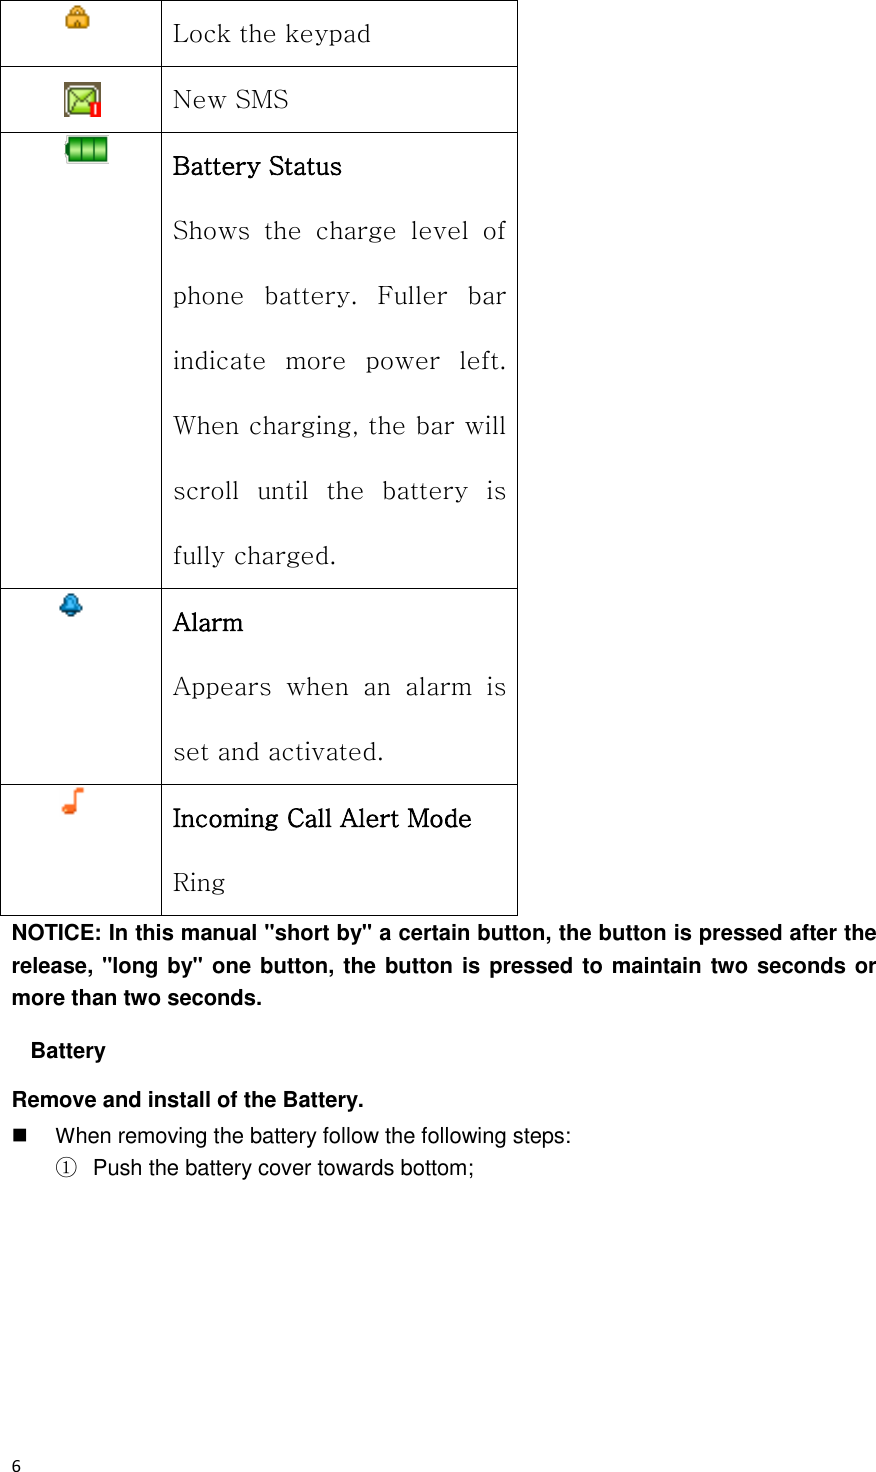  6   Lock the keypad  New SMS  Battery Status Shows  the  charge  level  of phone  battery.  Fuller  bar indicate  more  power  left. When charging, the bar will scroll  until  the  battery  is fully charged.  Alarm Appears  when  an  alarm  is set and activated.  Incoming Call Alert Mode Ring NOTICE: In this manual &quot;short by&quot; a certain button, the button is pressed after the release, &quot;long by&quot; one button, the button is pressed to maintain two seconds or more than two seconds. Battery   Remove and install of the Battery.  When removing the battery follow the following steps: ①  Push the battery cover towards bottom; 